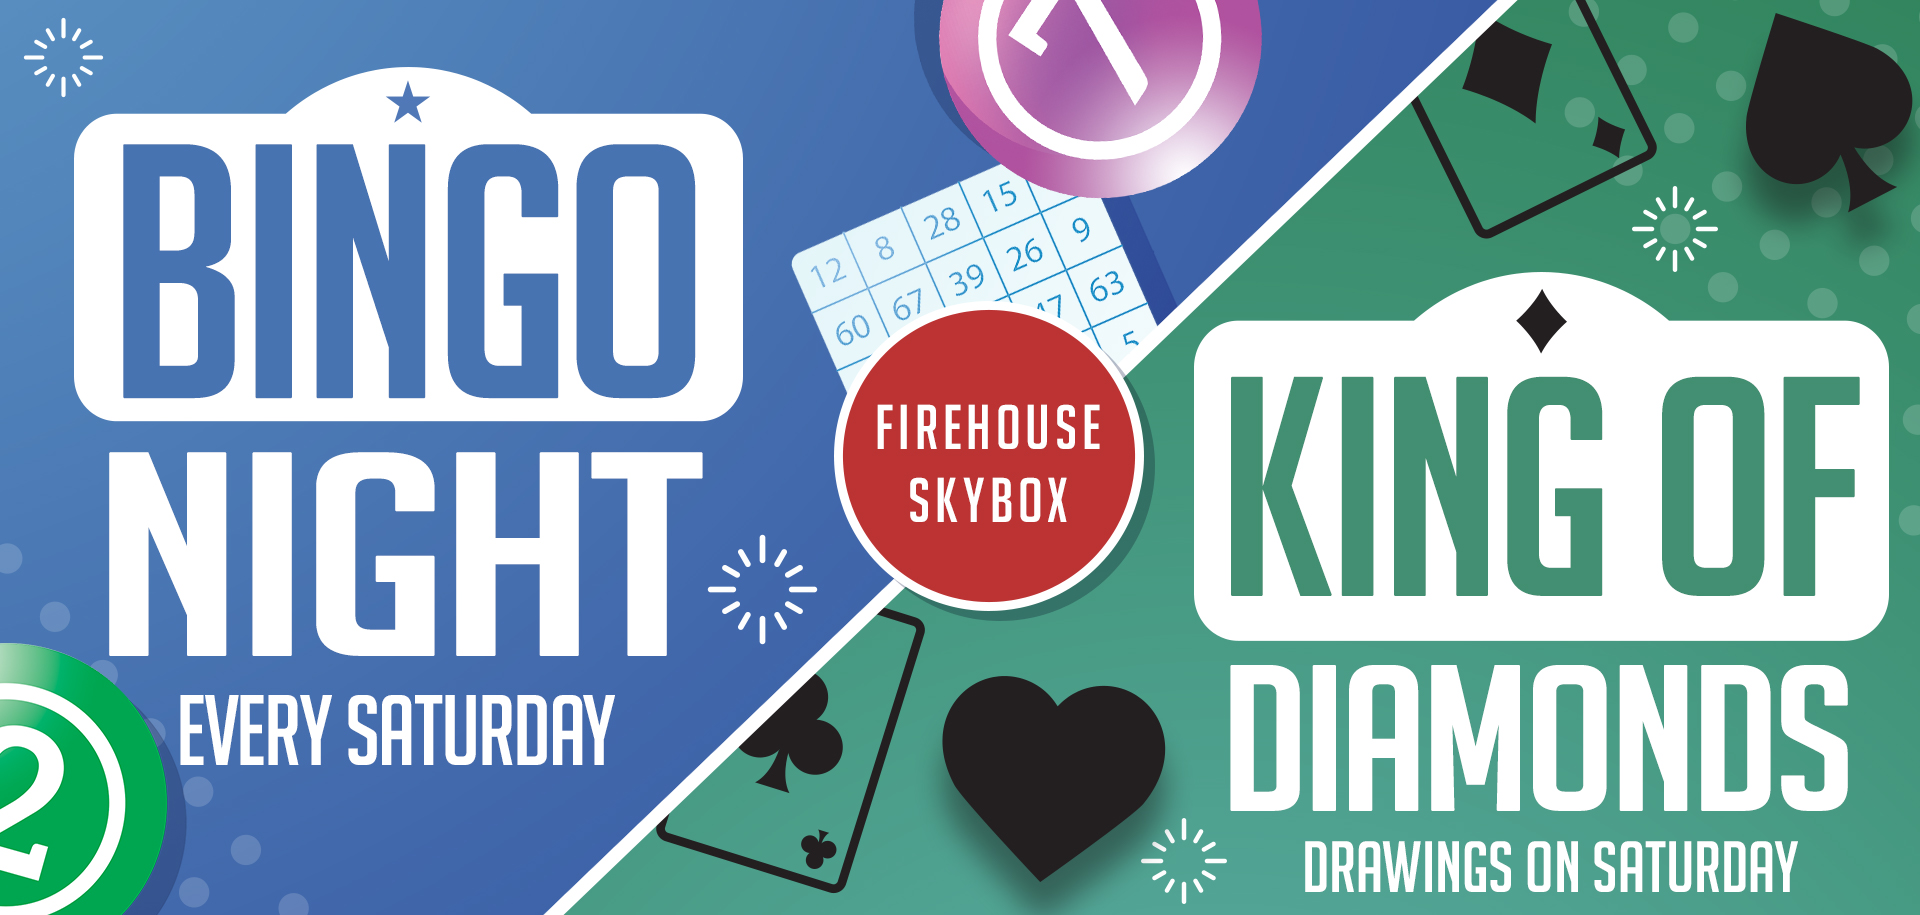 Bingo Night and King of Diamonds Night at Firehouse Sky Box in Downtown Rapid City